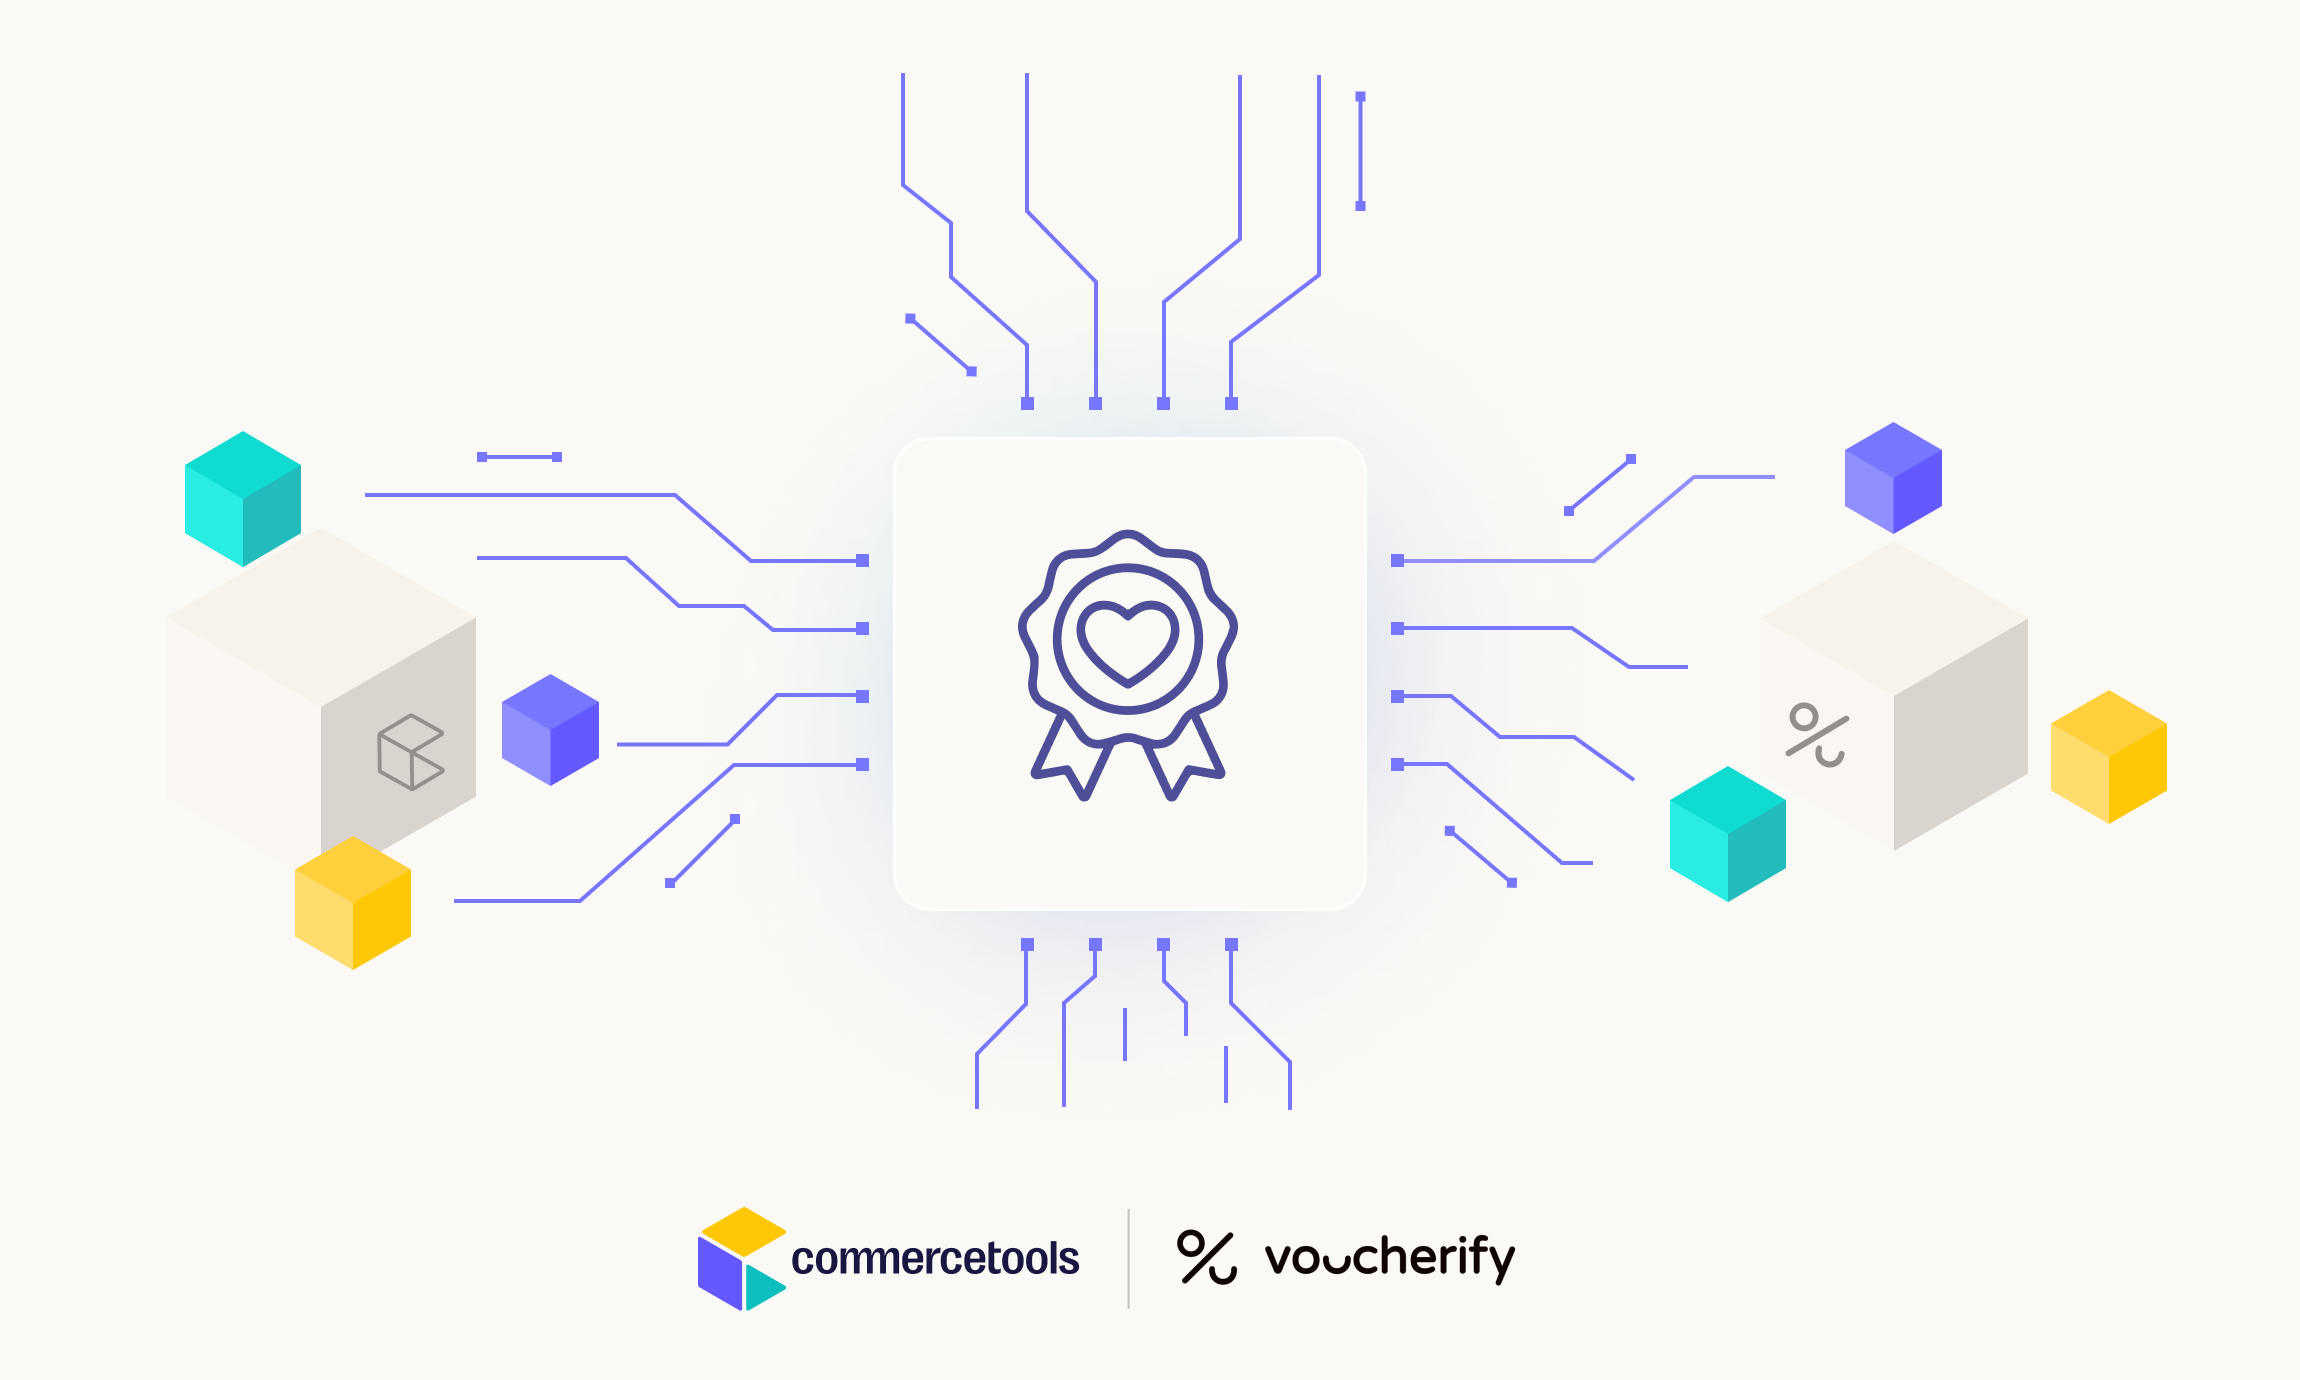 How to take your loyalty to the next level with commercetools and Voucherify